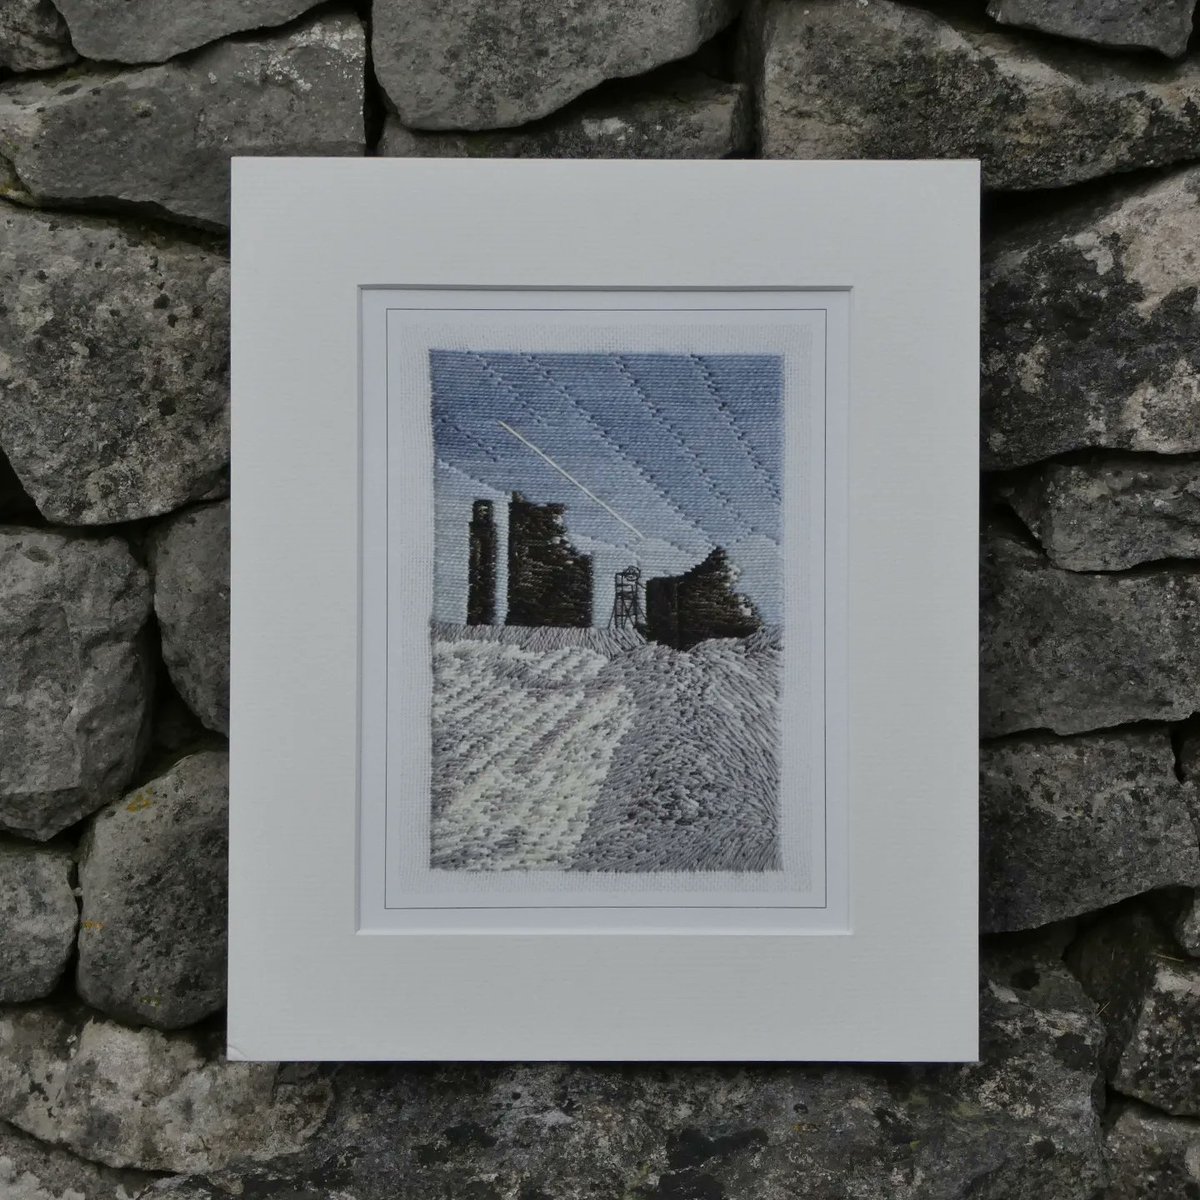 I have prints of Frozen Bones, Magpie Mine. As usual they are wonderfully realistic, and I'm so pleased with them. Available on my website now cognissart.co.uk/product/frozen… #FineArtInStitch #TextileArt #Art #embroidery #stitching #embroideryart #fineart #ContemporaryArt #MagpieMine